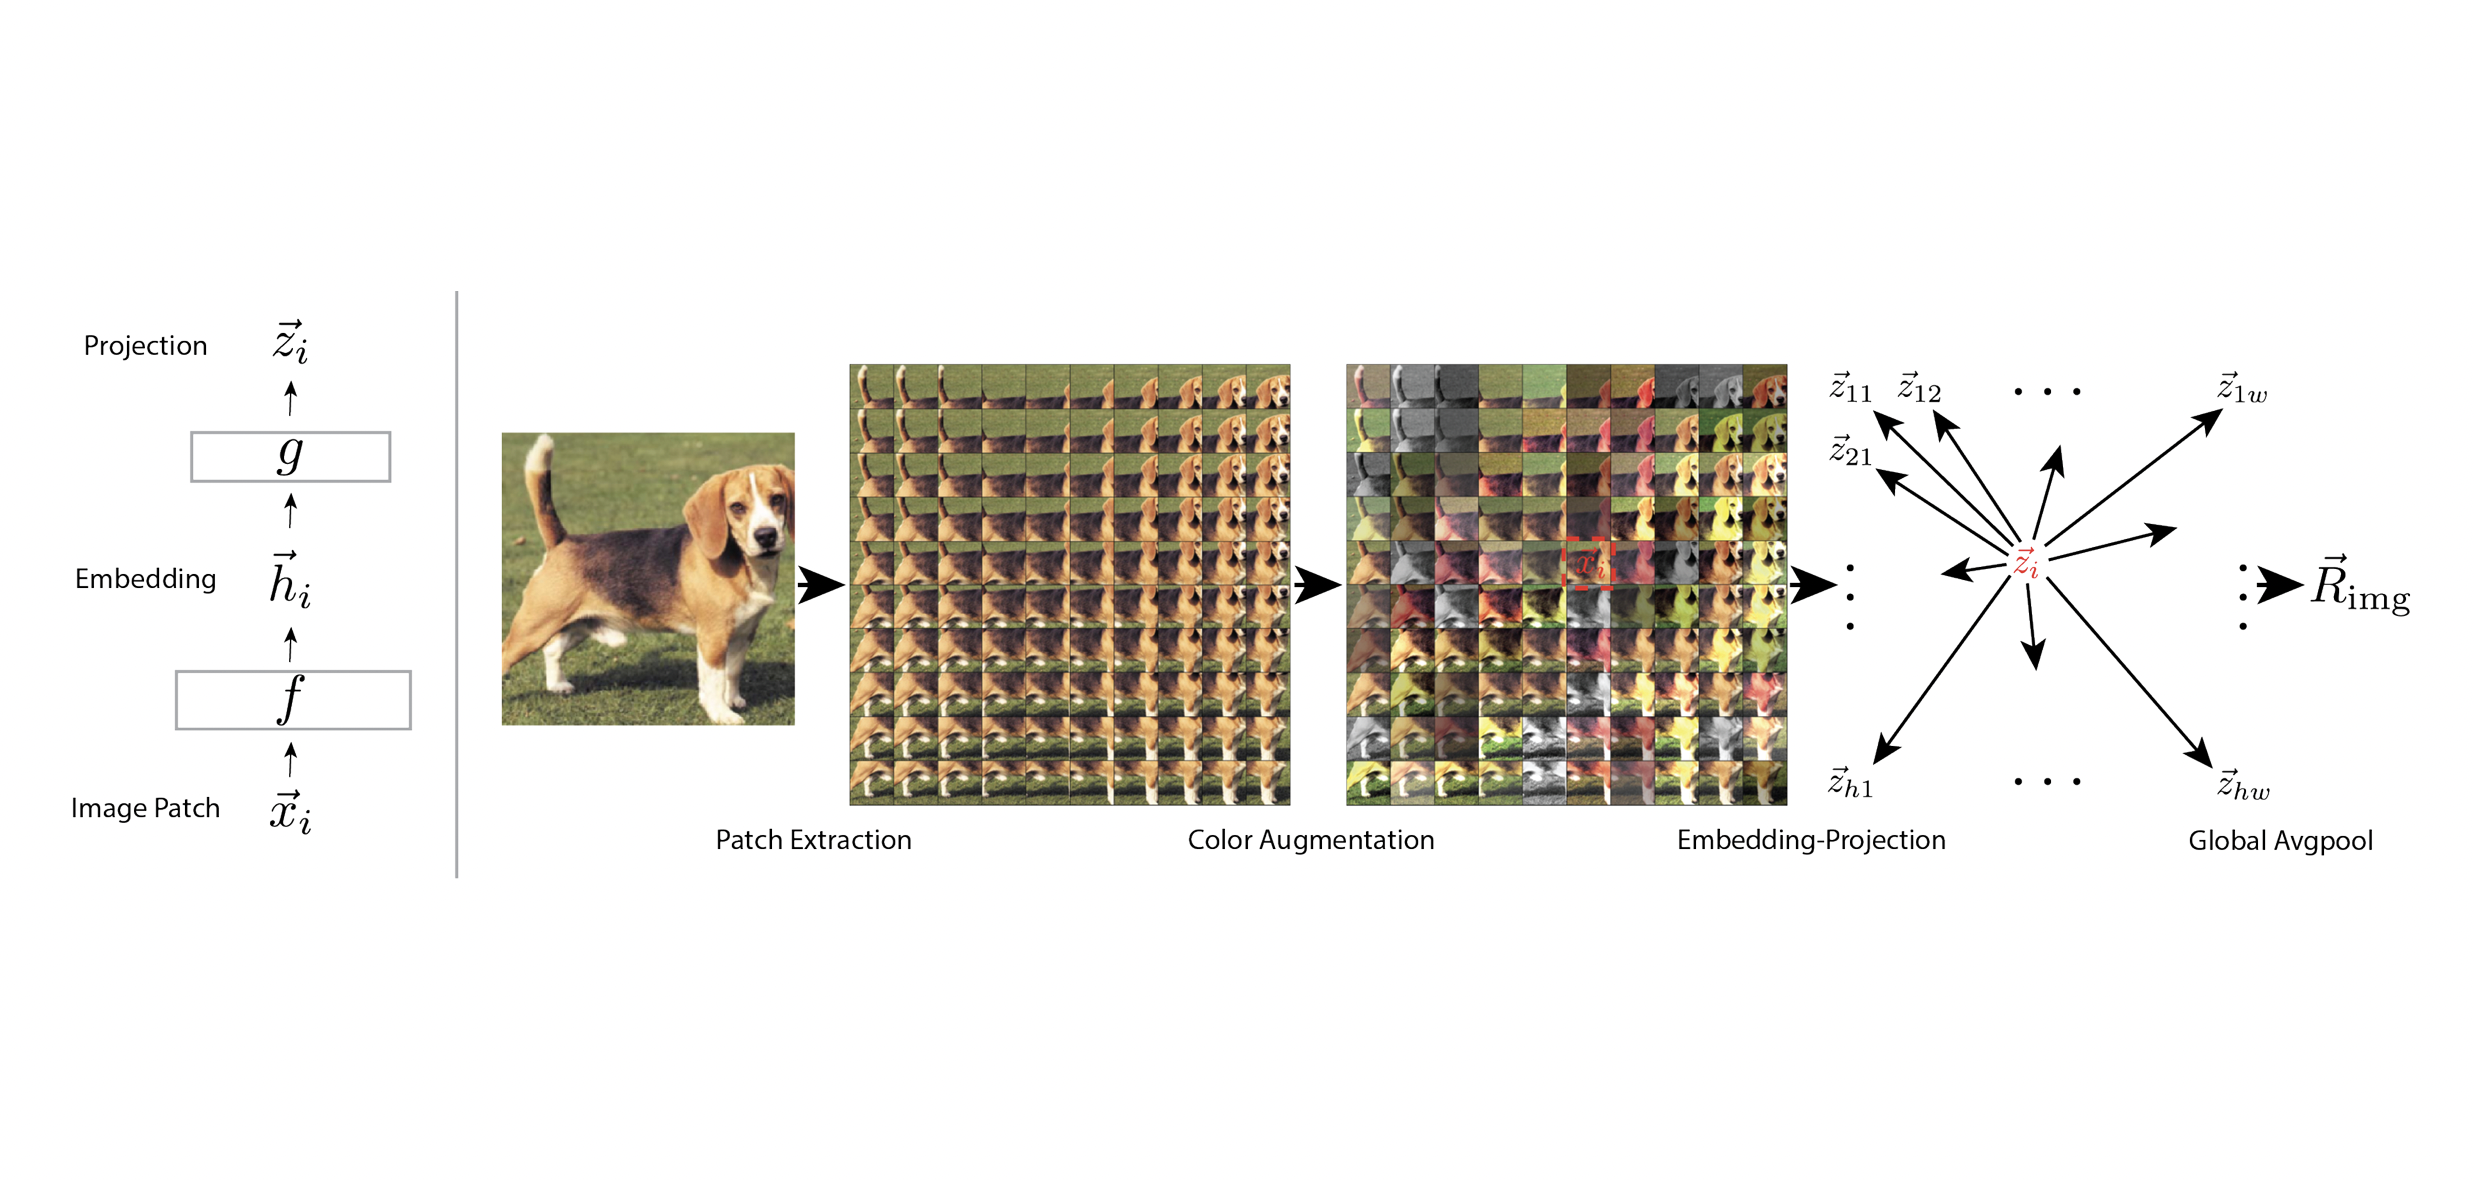 Intra-Instance VICReg: Bag of Self-Supervised Image Patch Embedding
              